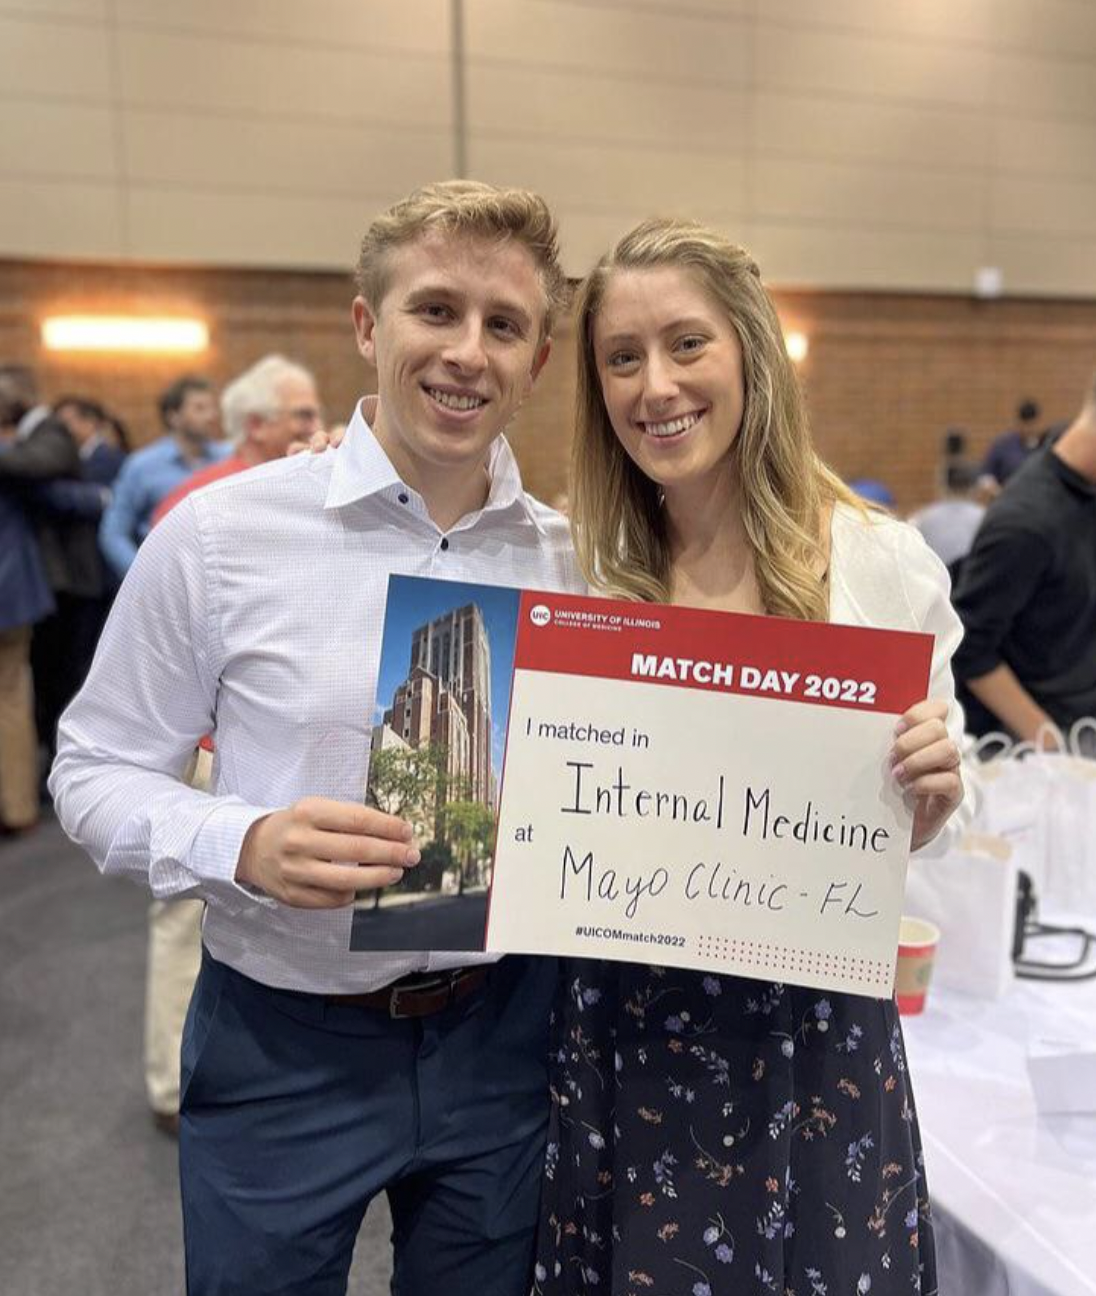 community - Match Day 2022 I matched in Internal Medicine Mayo Clinic